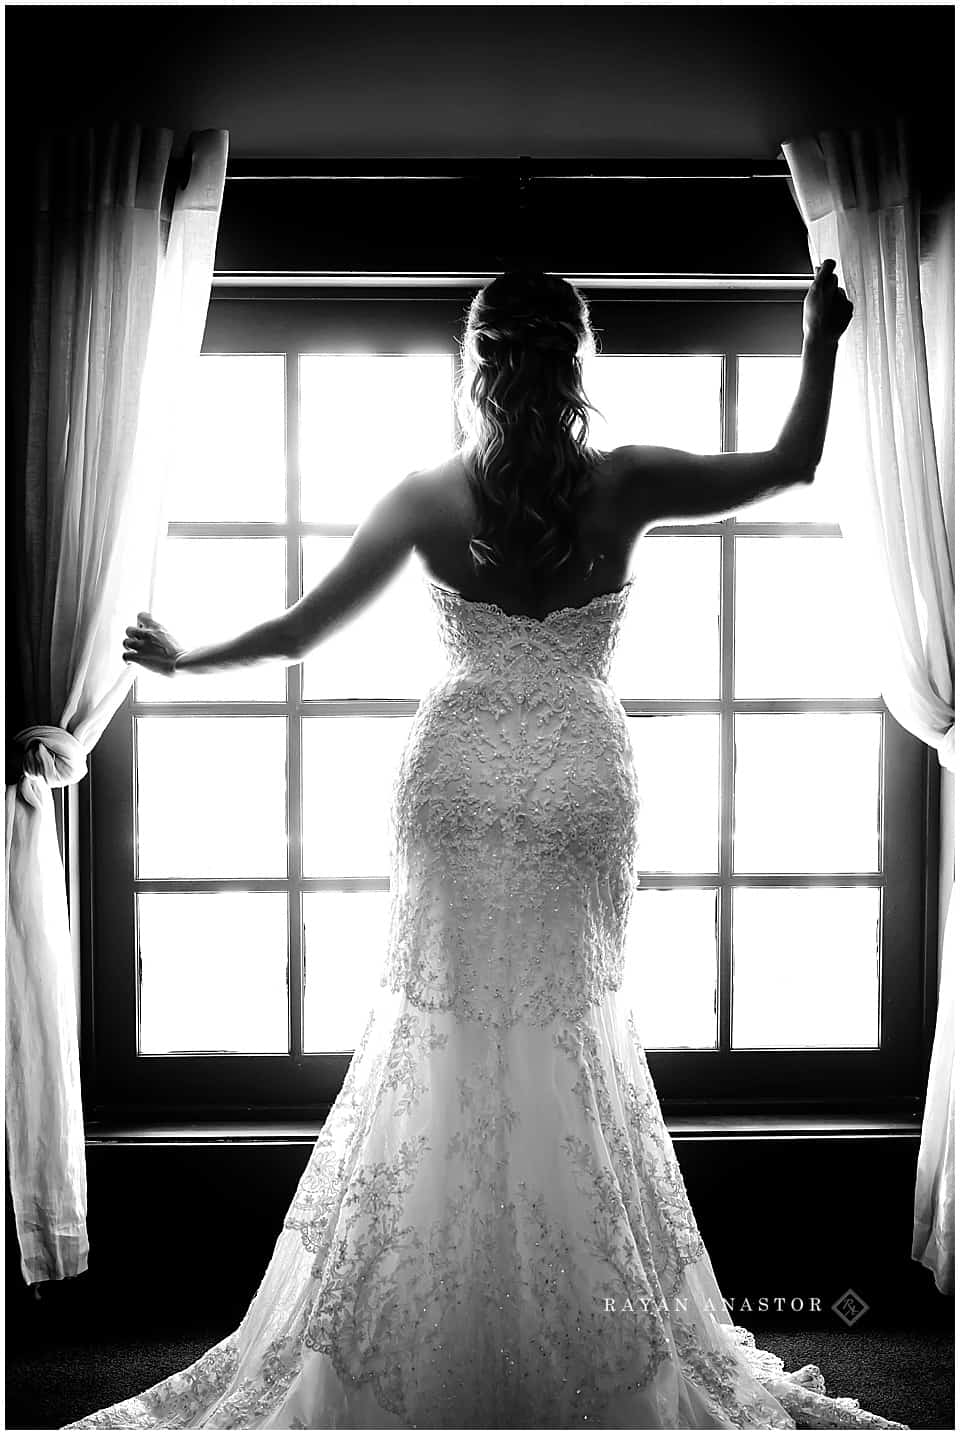 silhouette of bride at window